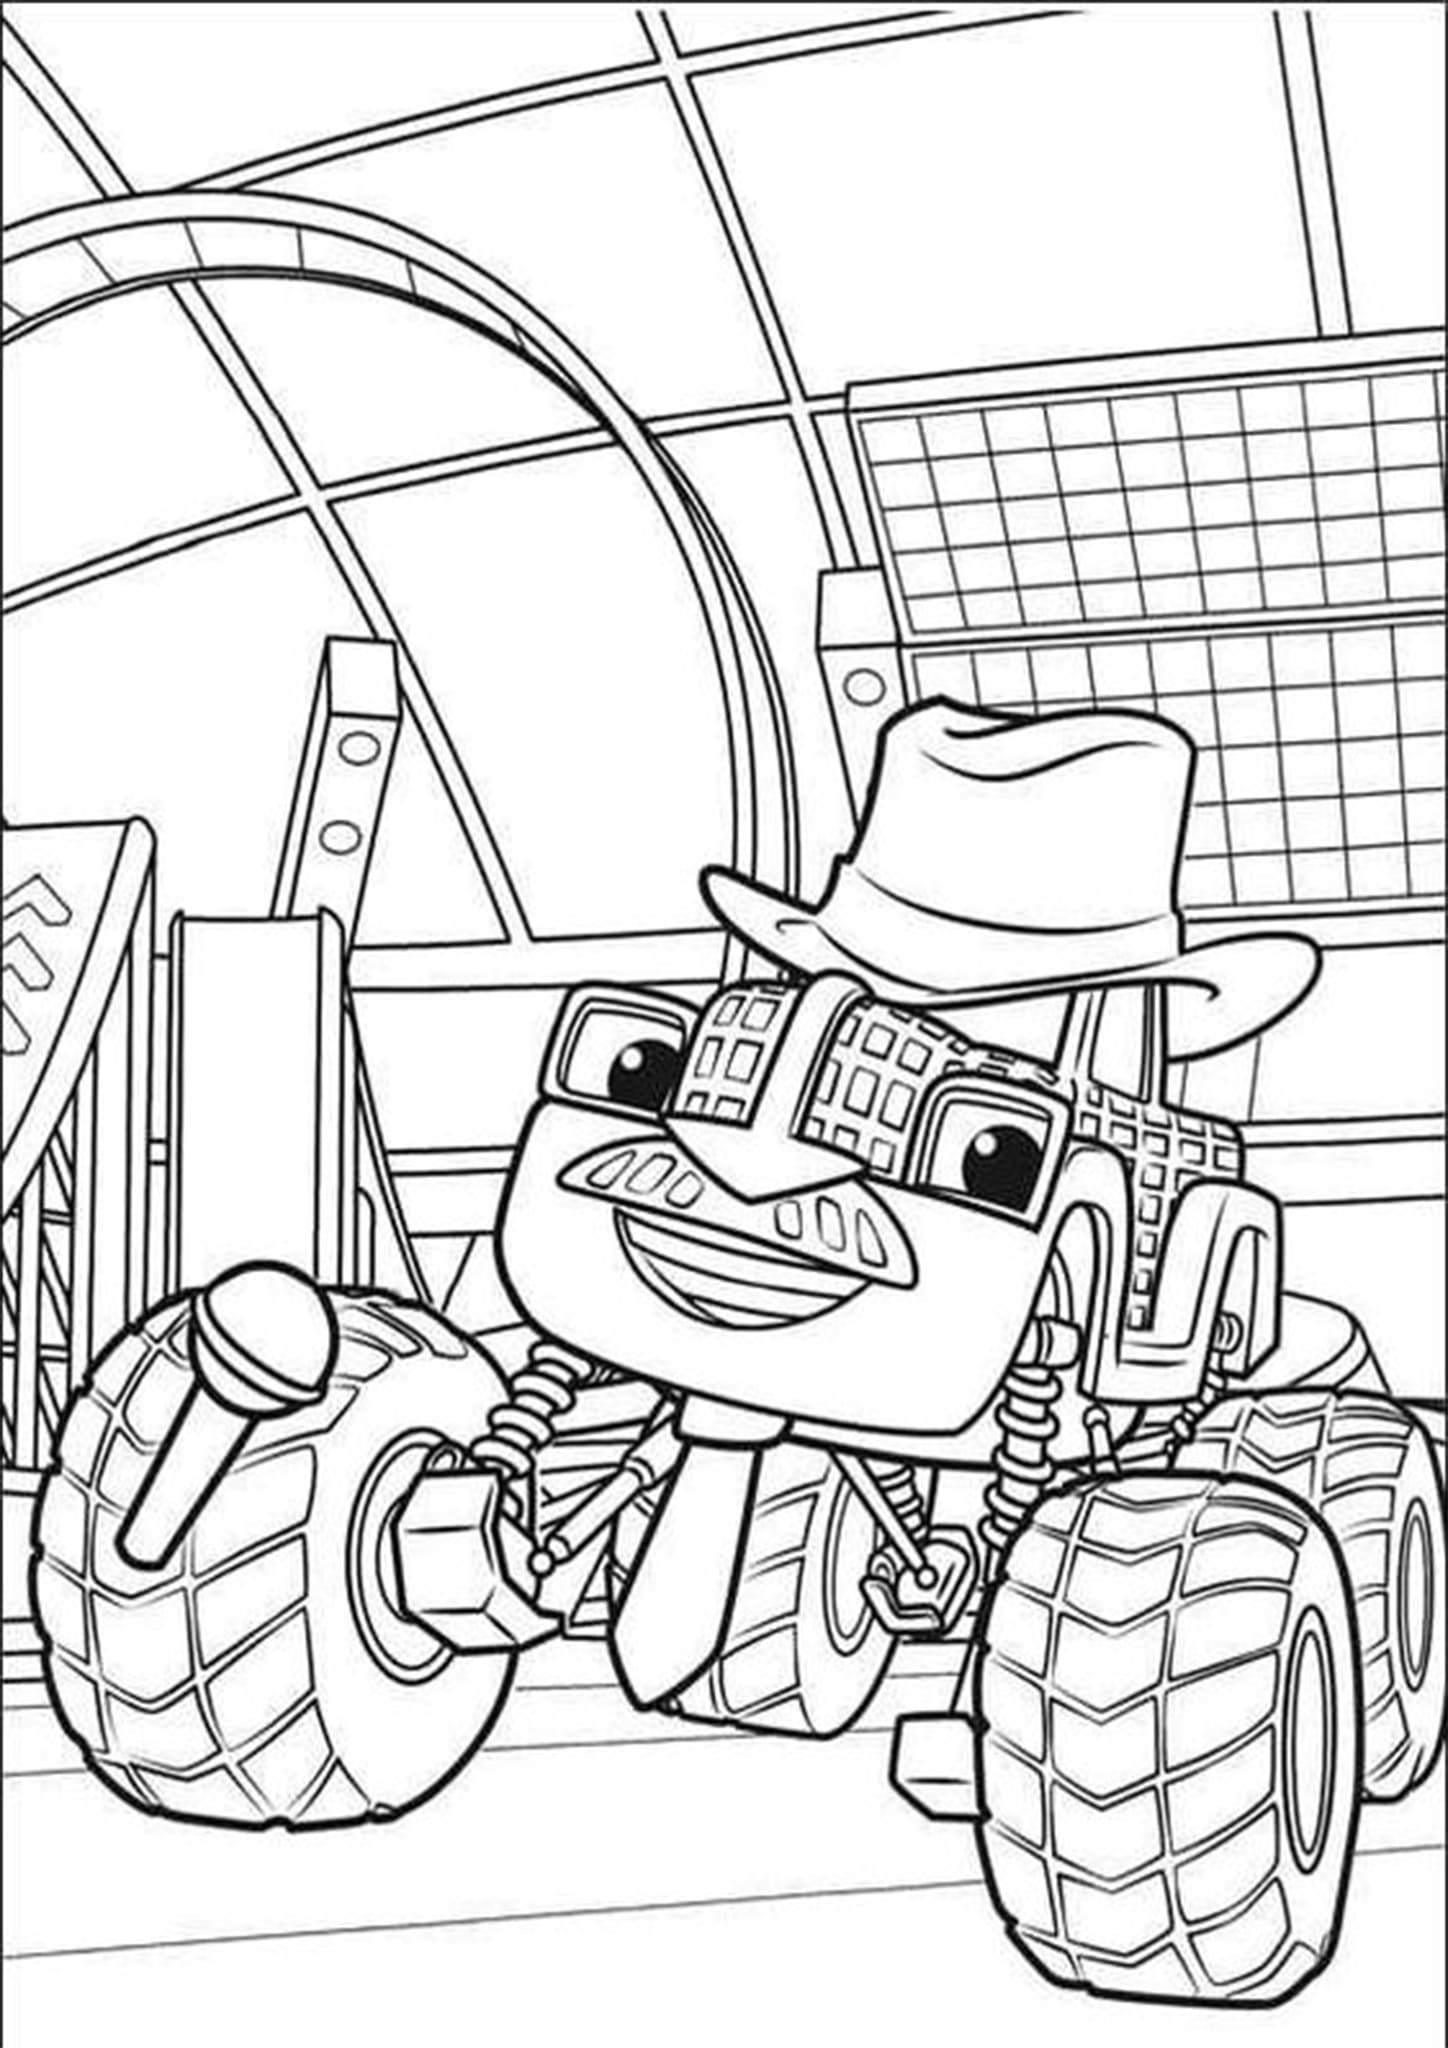 Download Free & Easy To Print Monster Truck Coloring Pages - Tulamama